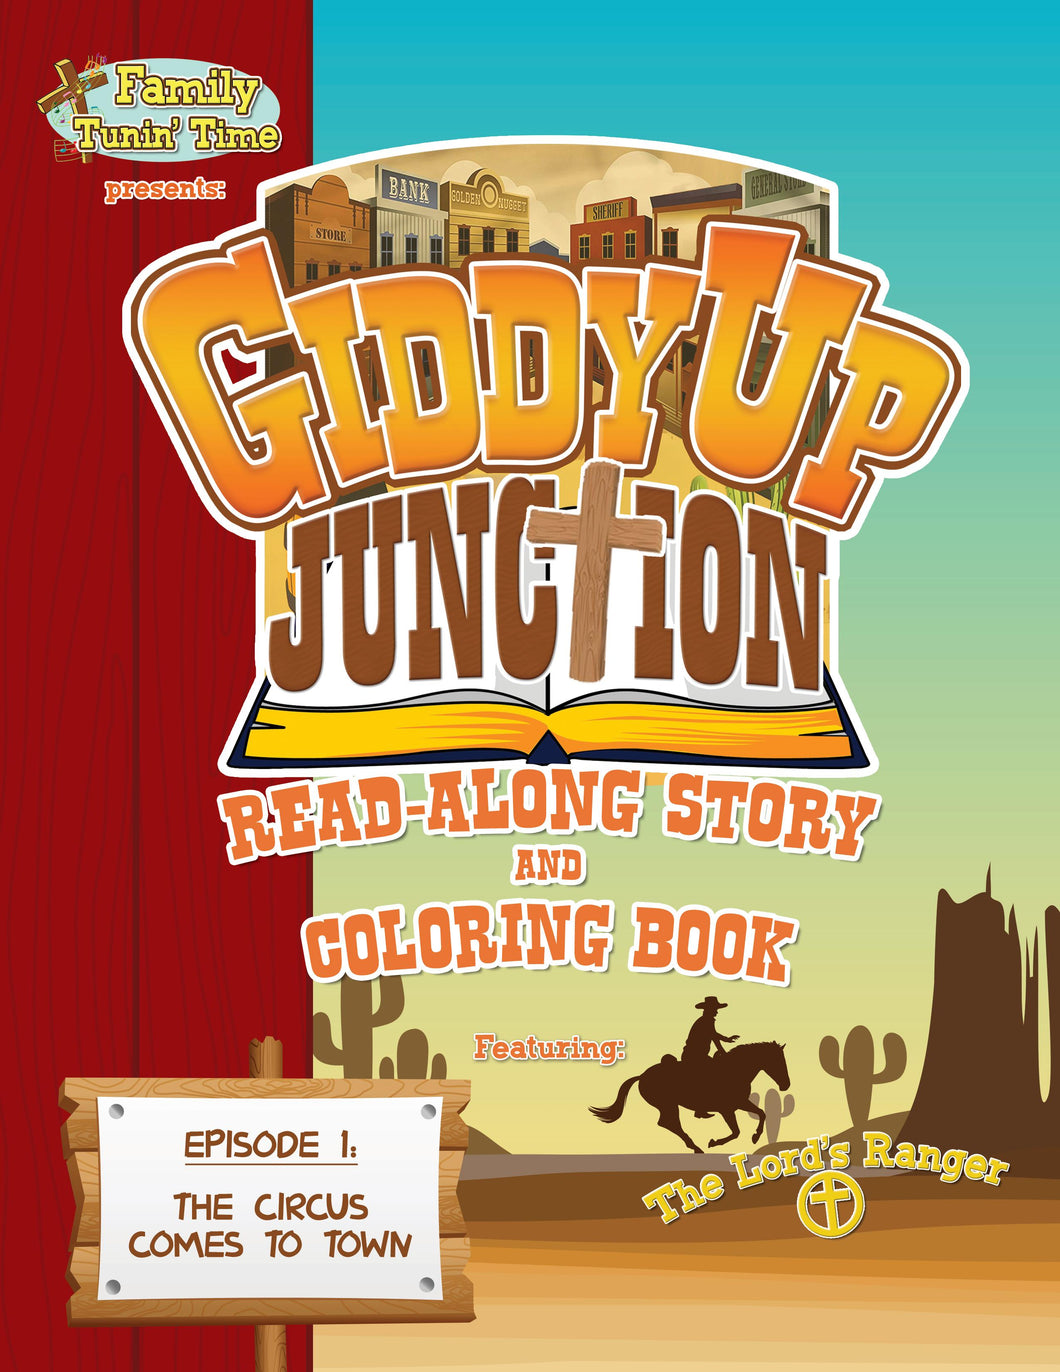 Giddy Up Junction Episode 1: The Circus Comes to Town